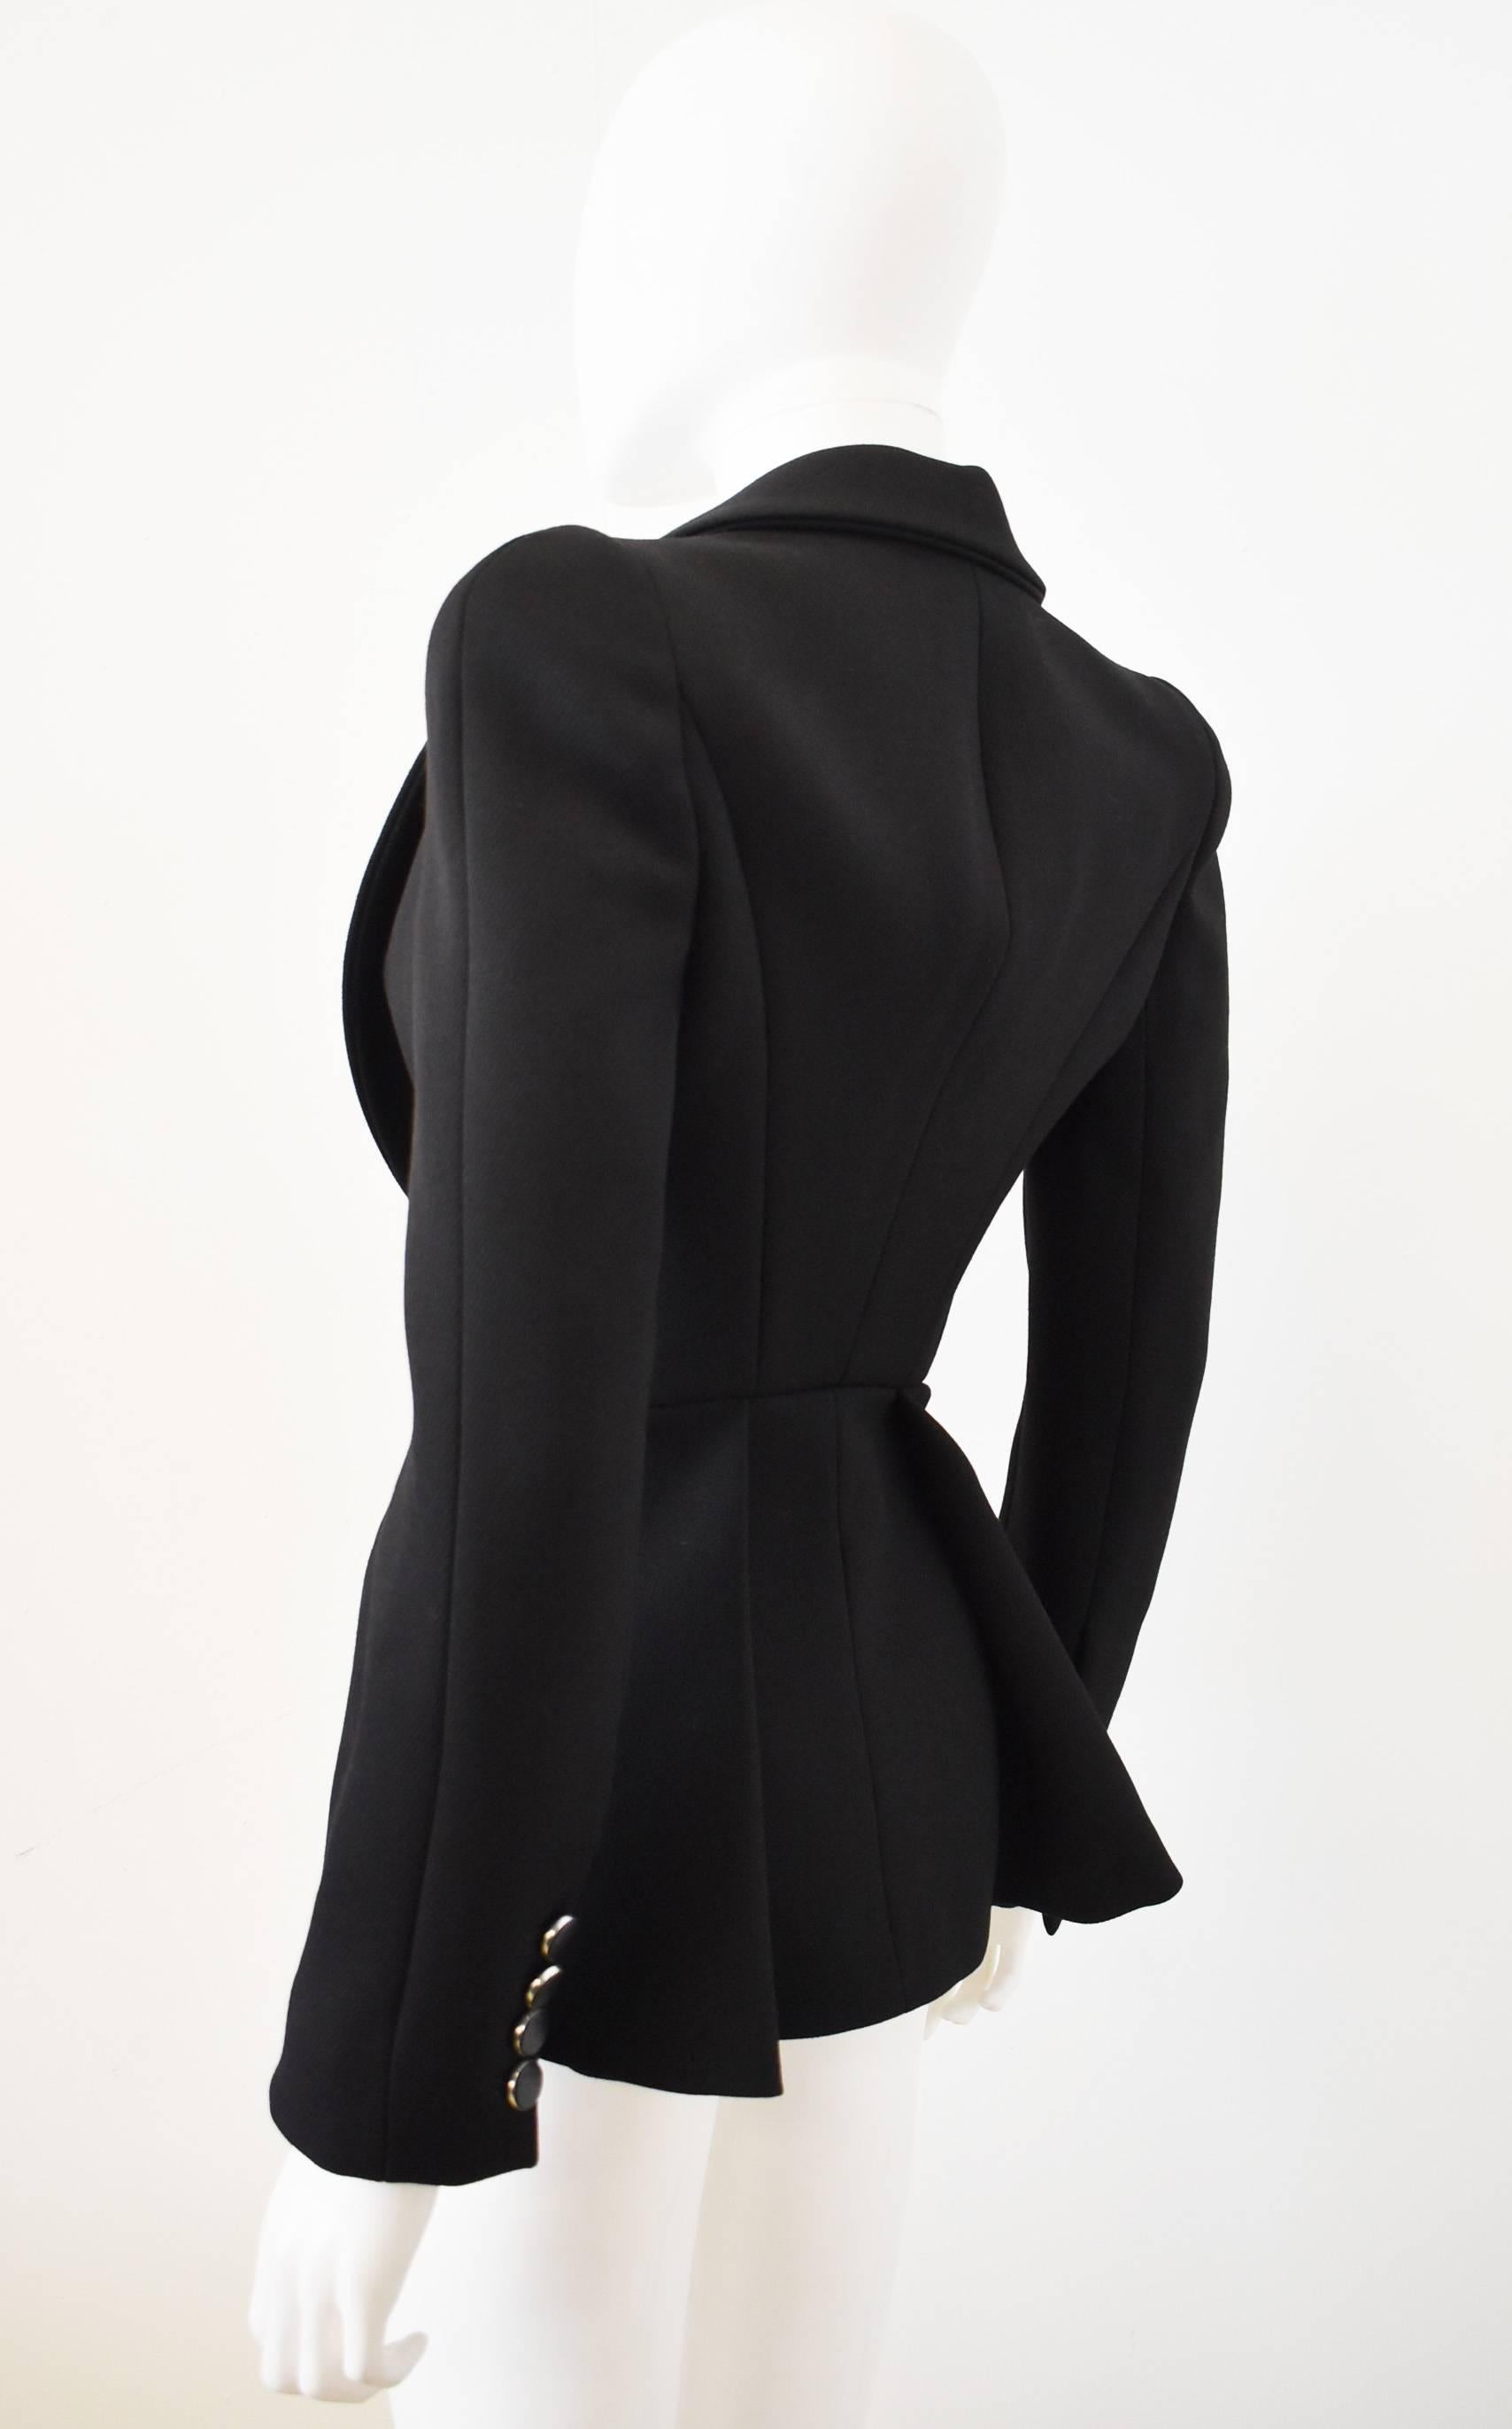 Alexander McQueen Black Fitted Jacket with ‘Cufflink’ Metal Fastening In Excellent Condition For Sale In London, GB